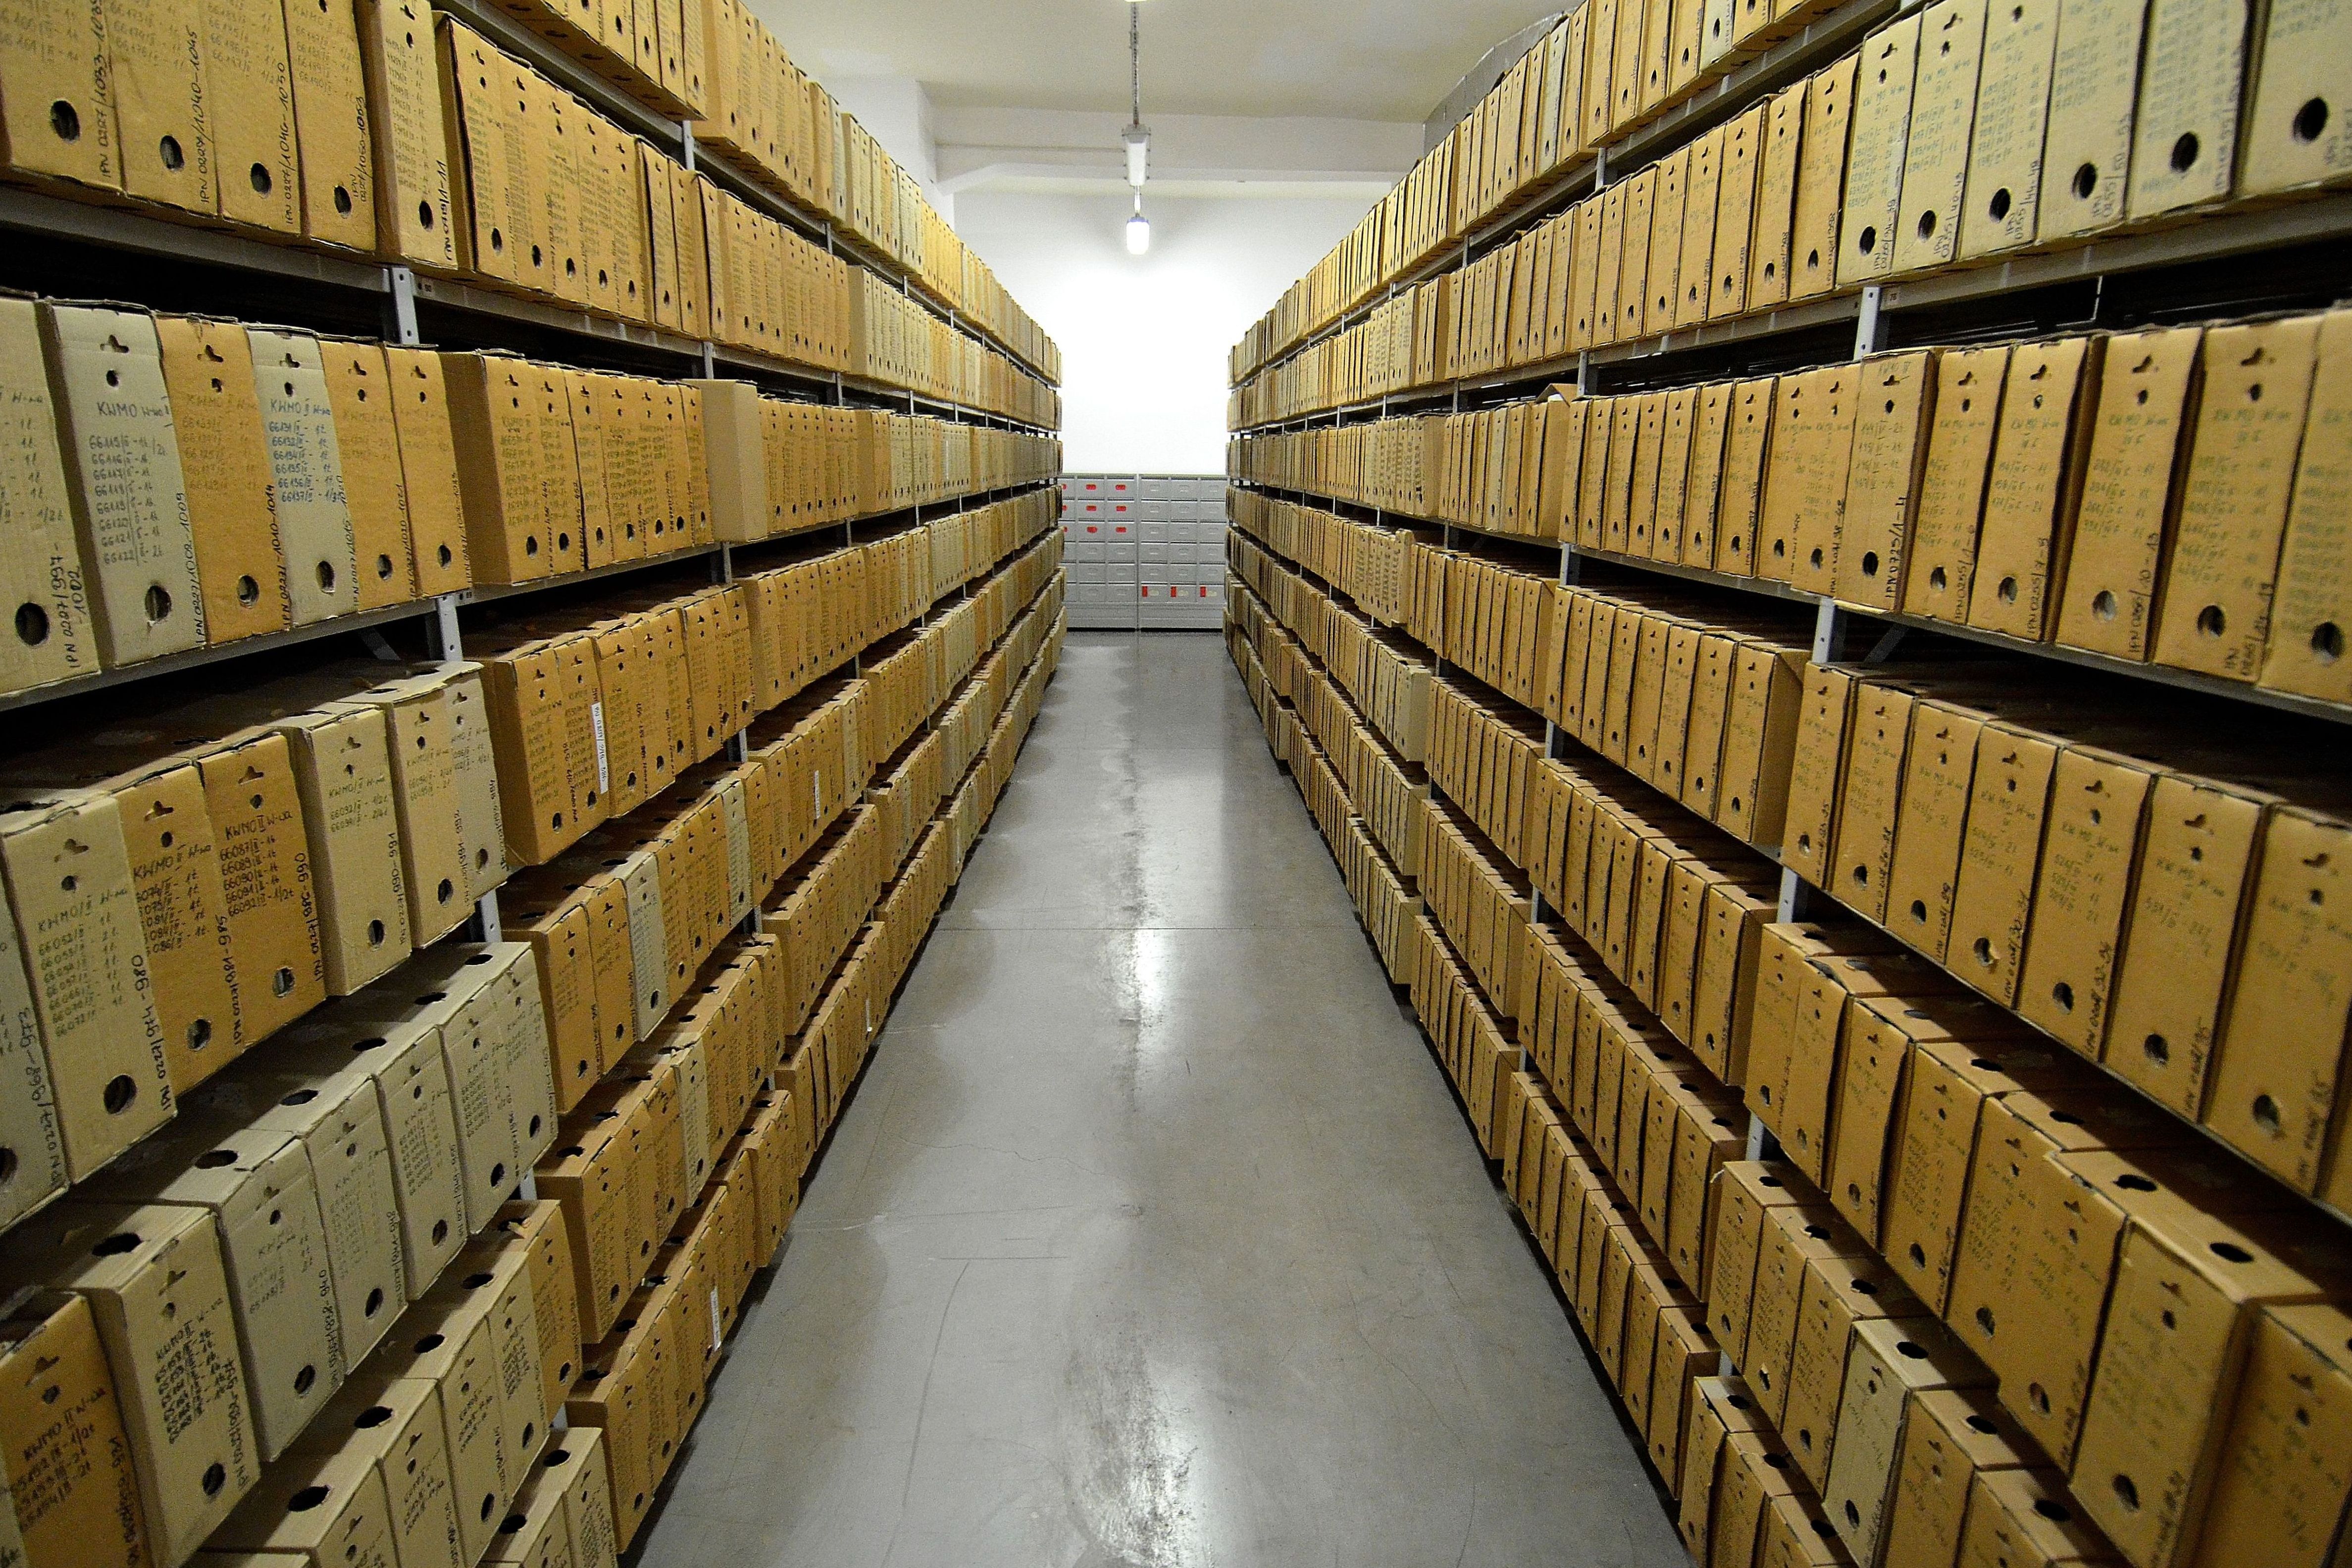 Archive at the former IPN headquarters in Warsaw. Author: Adrian Grycuk. Source: wikimedia/ CC BY-SA 3.0 pl